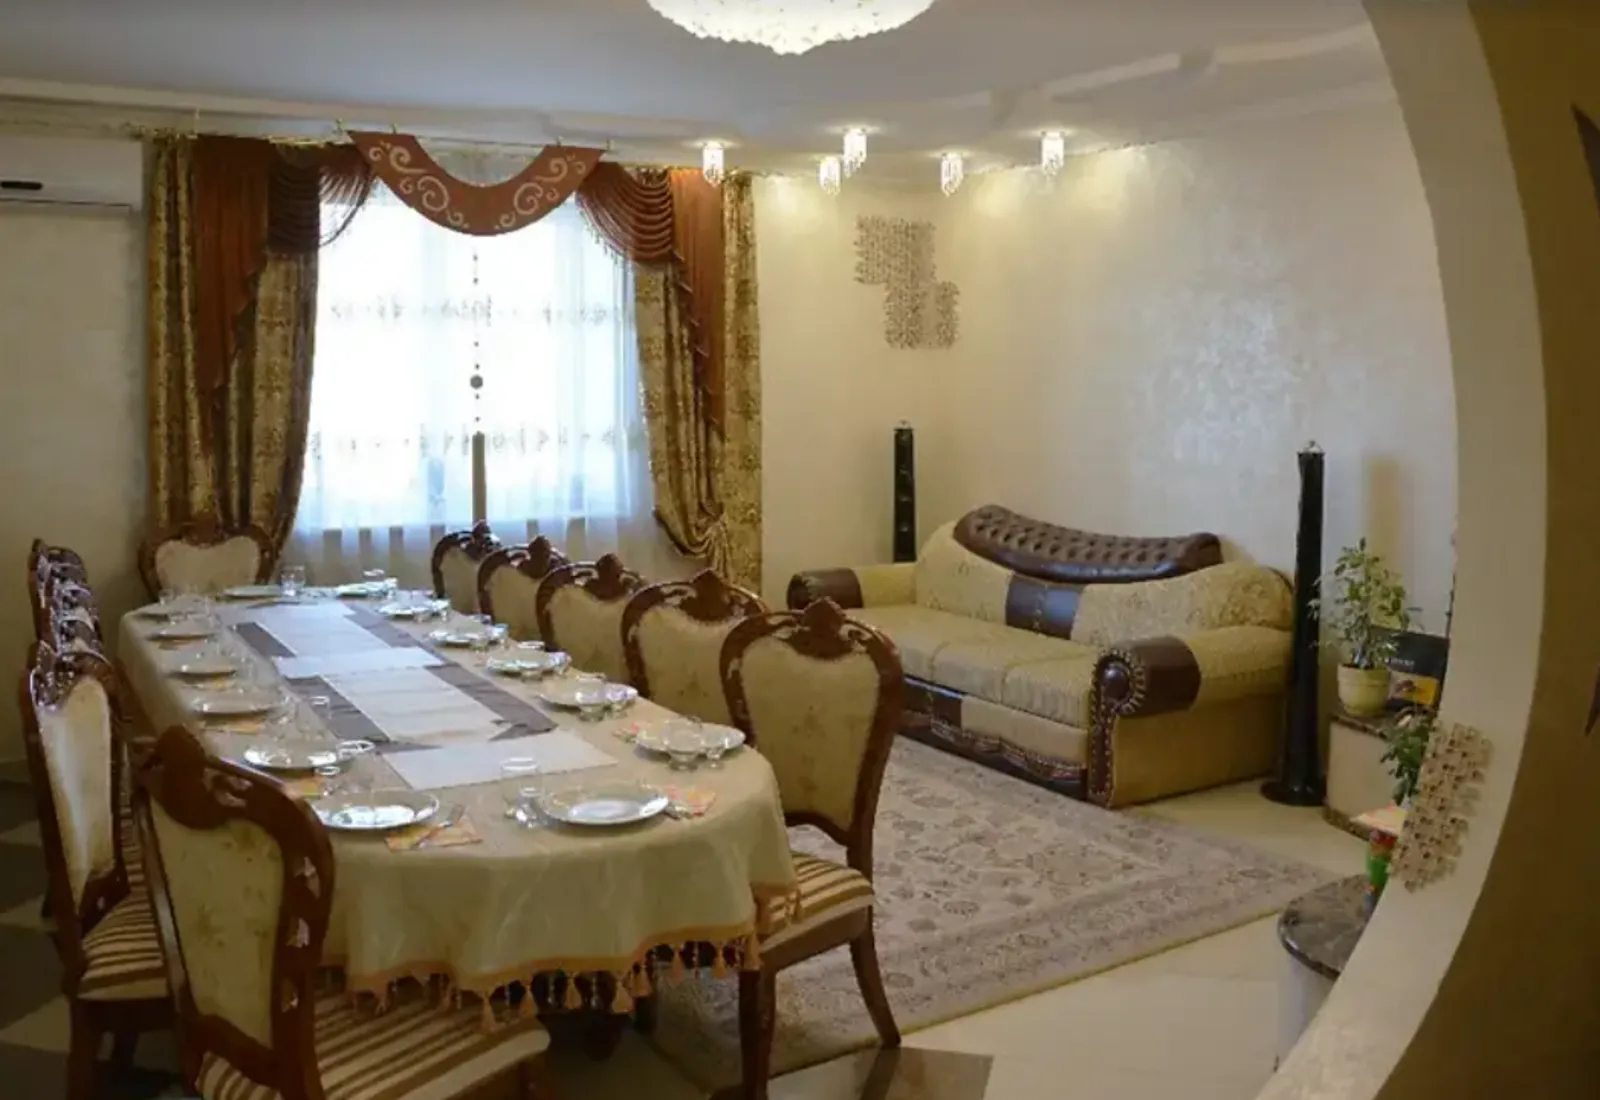 House for sale. 230 m², 3 floors. Vostochnyy, Ternopil. 